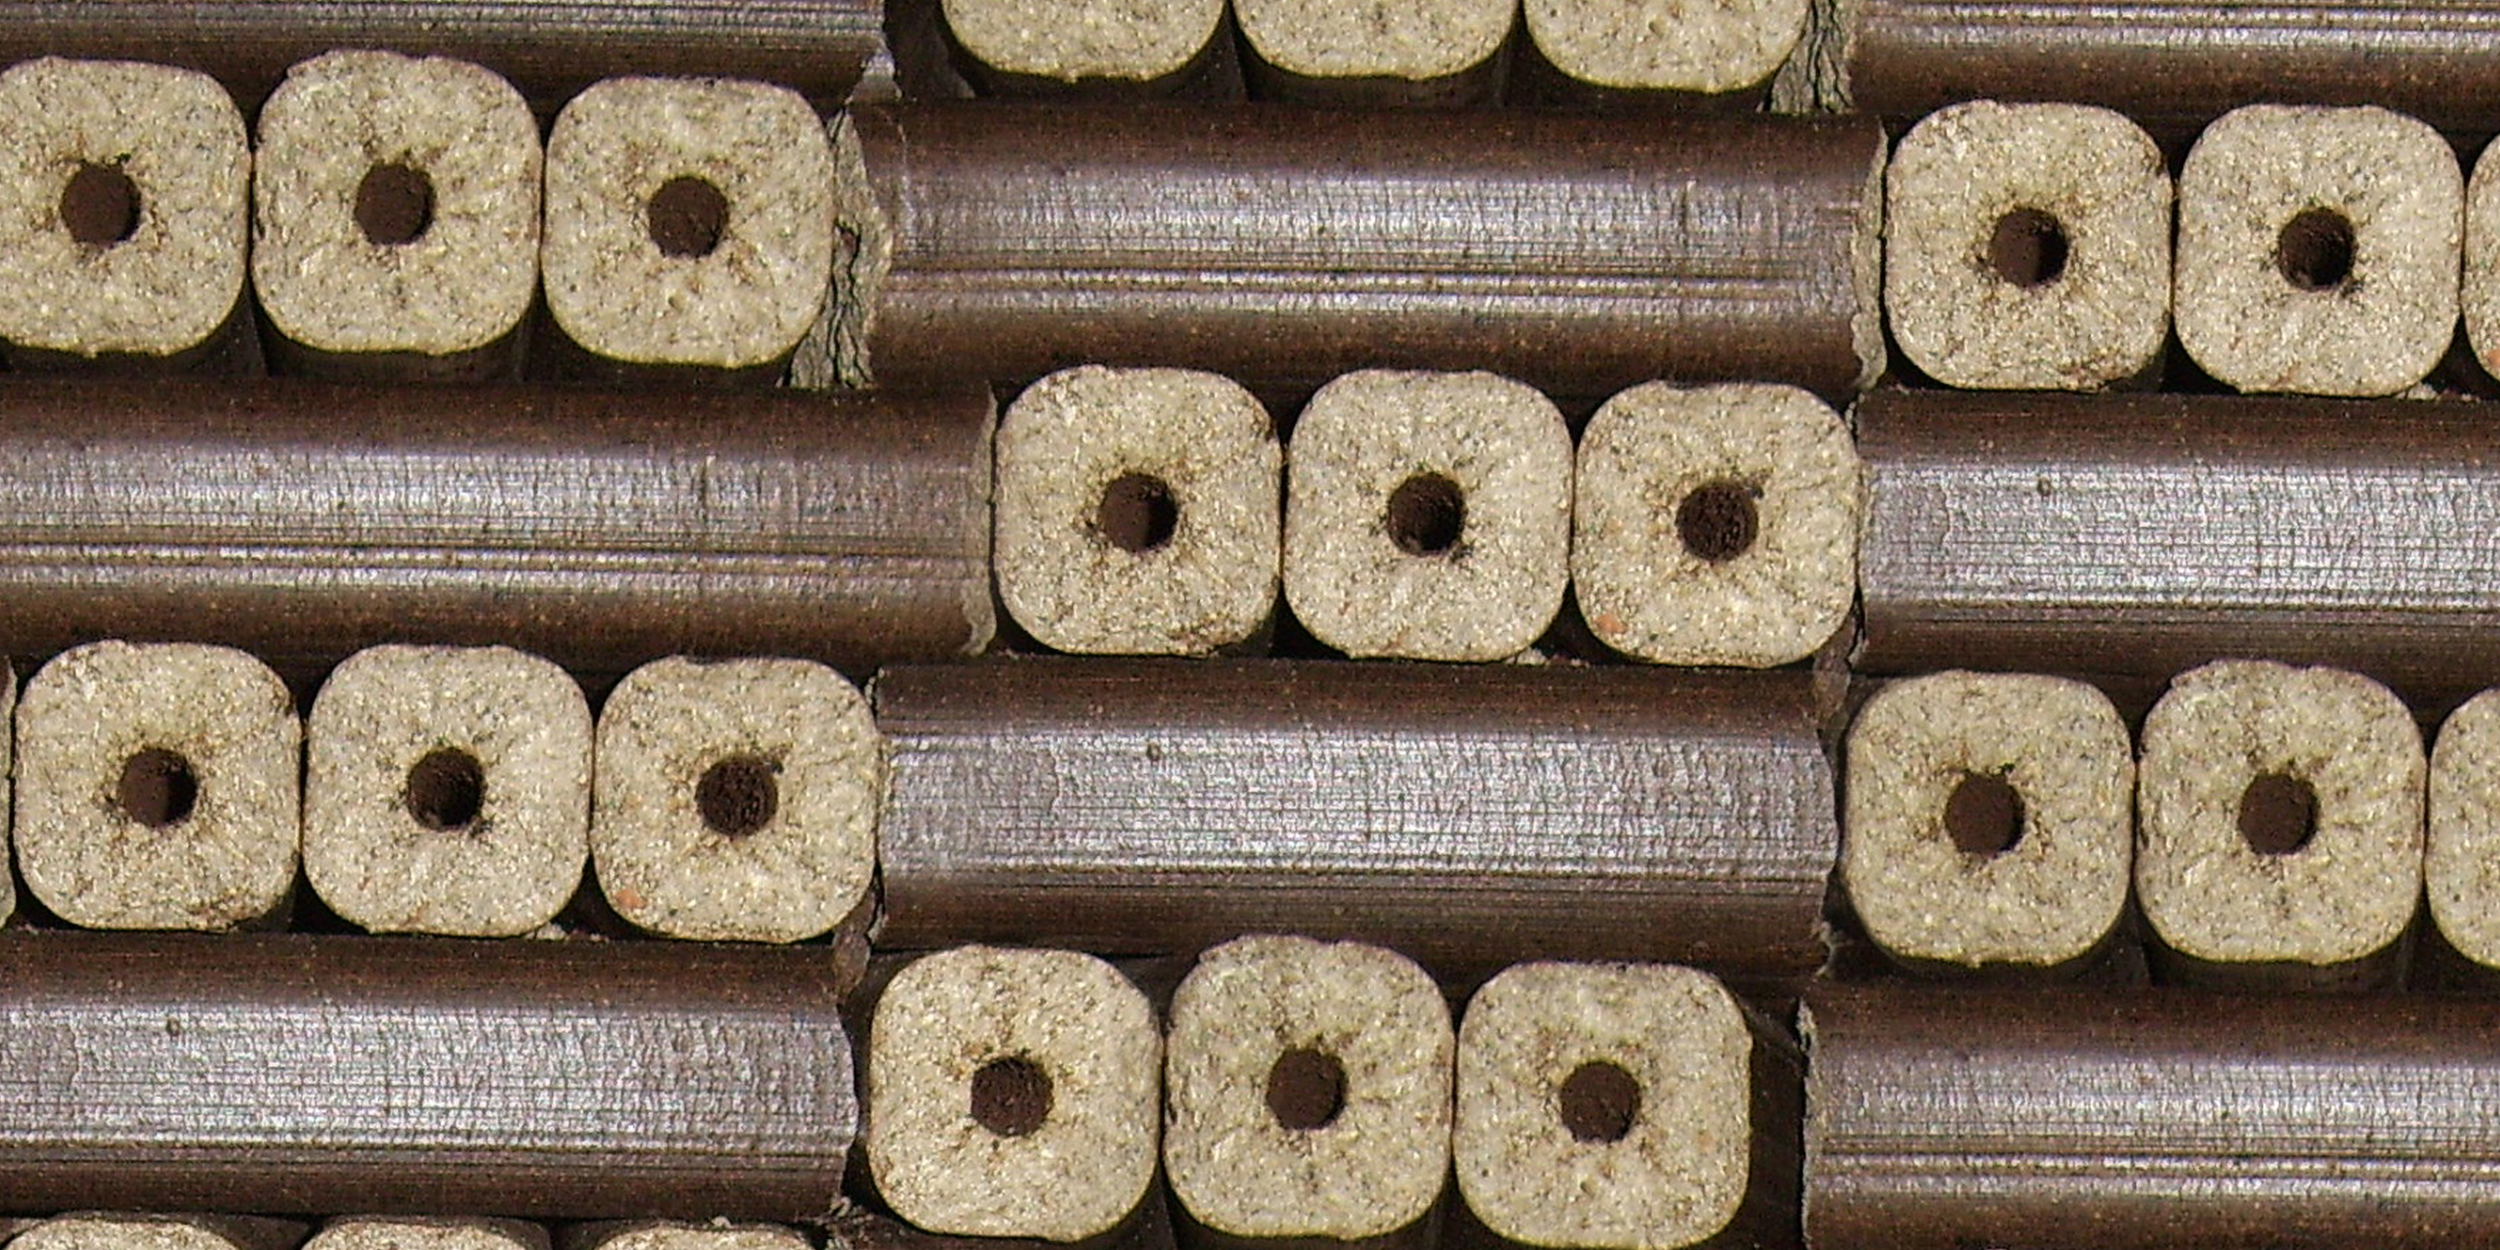 Wood briquettes and the importance of chemical analysis